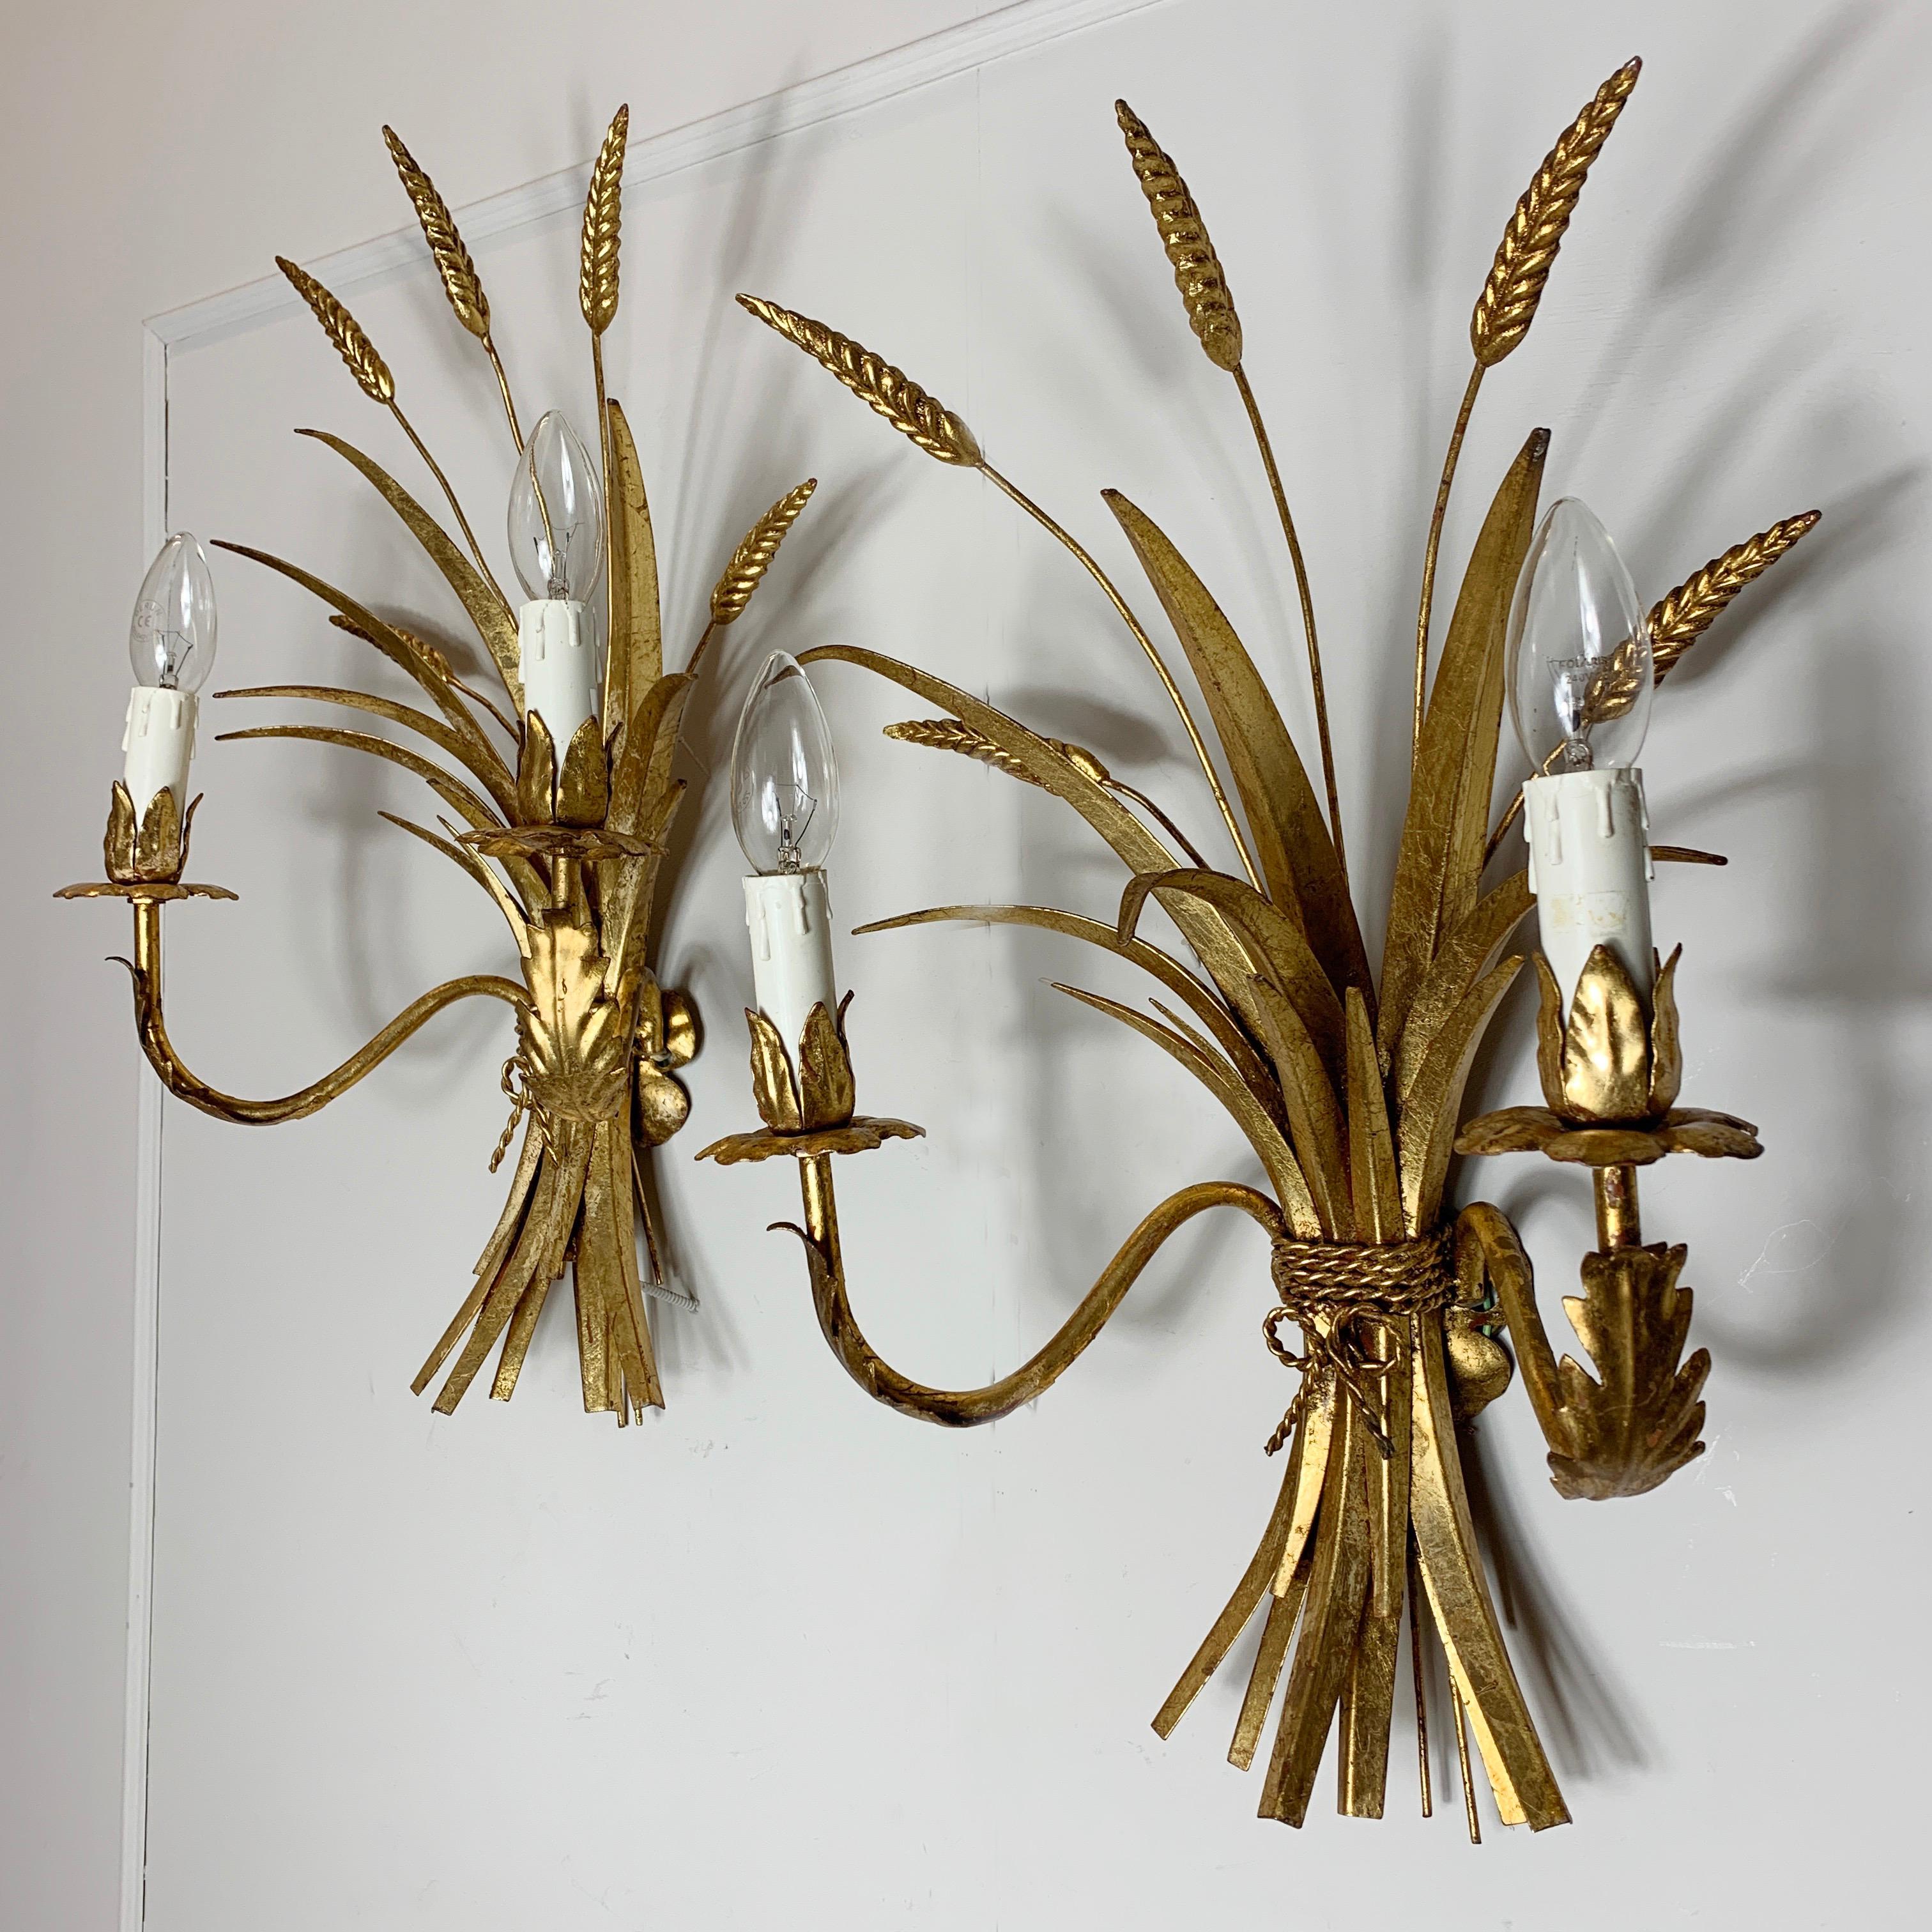 Gilt wheat sheaf wall sconce's, circa 1970s
Large full pair of wheatsheaf and leaf wall sconce's
Bright original gilt leaf finish
Measures: 58cm height, 36cm width 21cm depth
2 lamp holders on each light, e14 small screw in bulbs
Pat